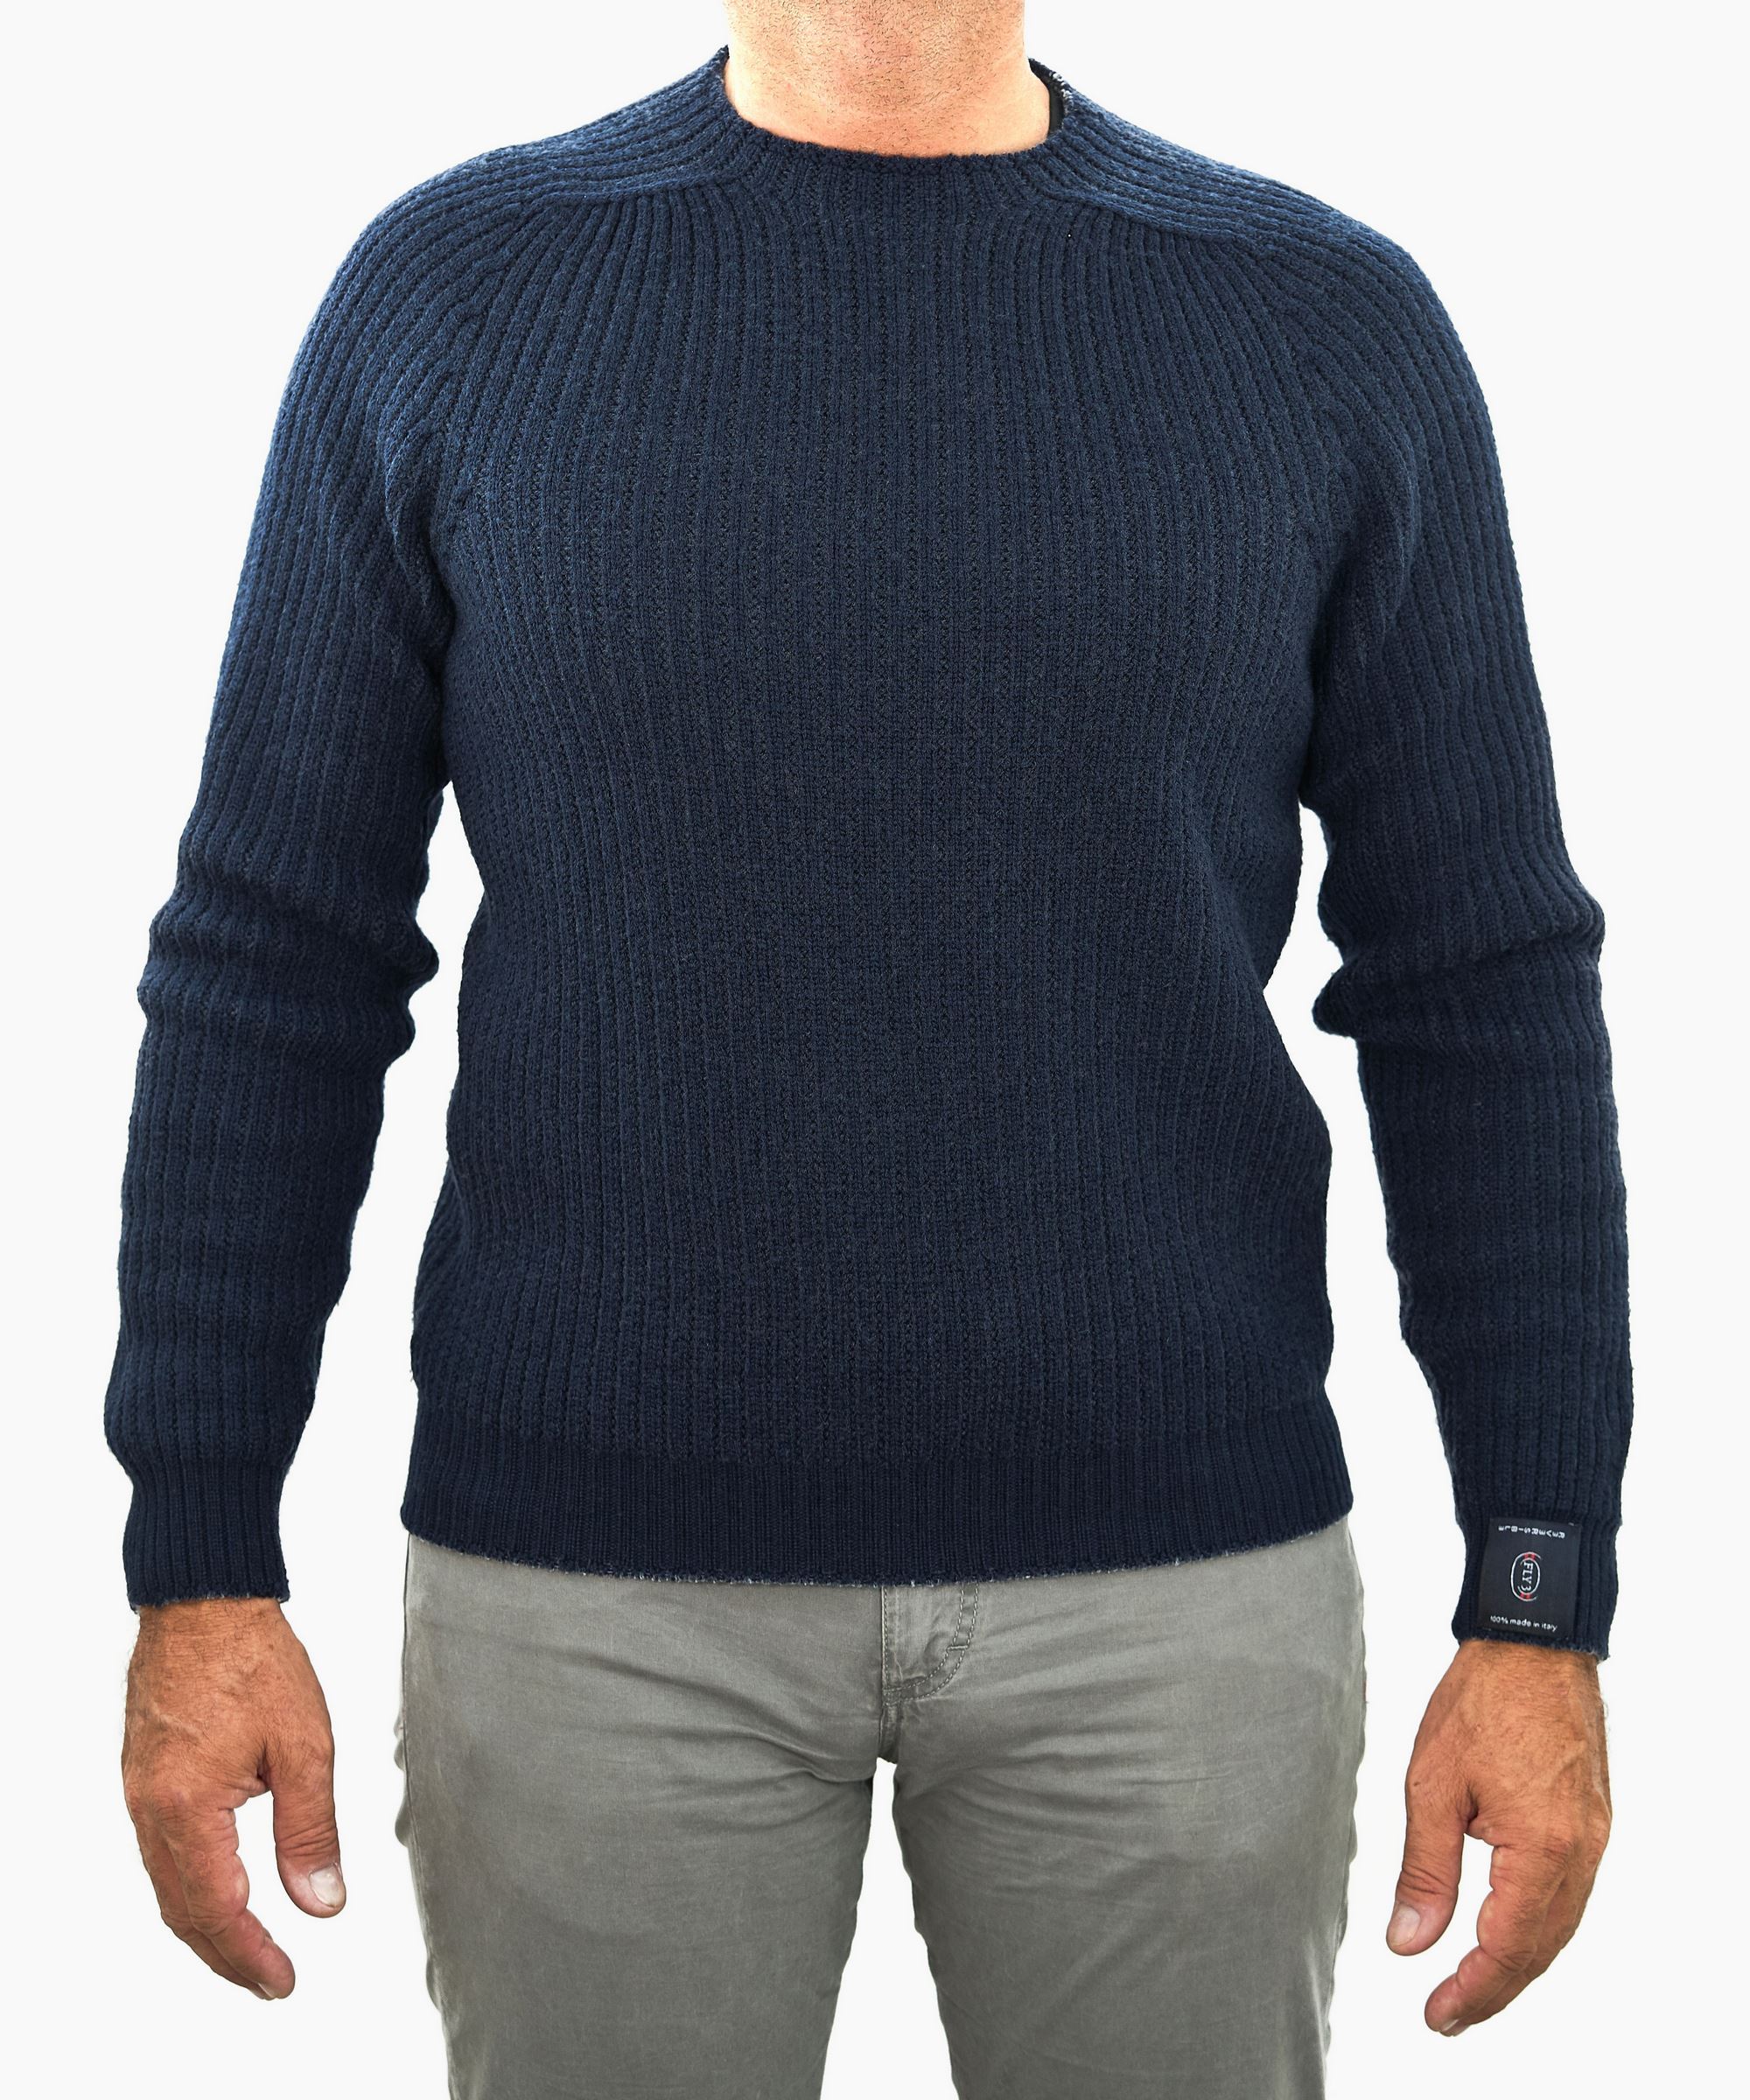 Picture of Tamata reversible sweater colour Navy blue/Xwhitely